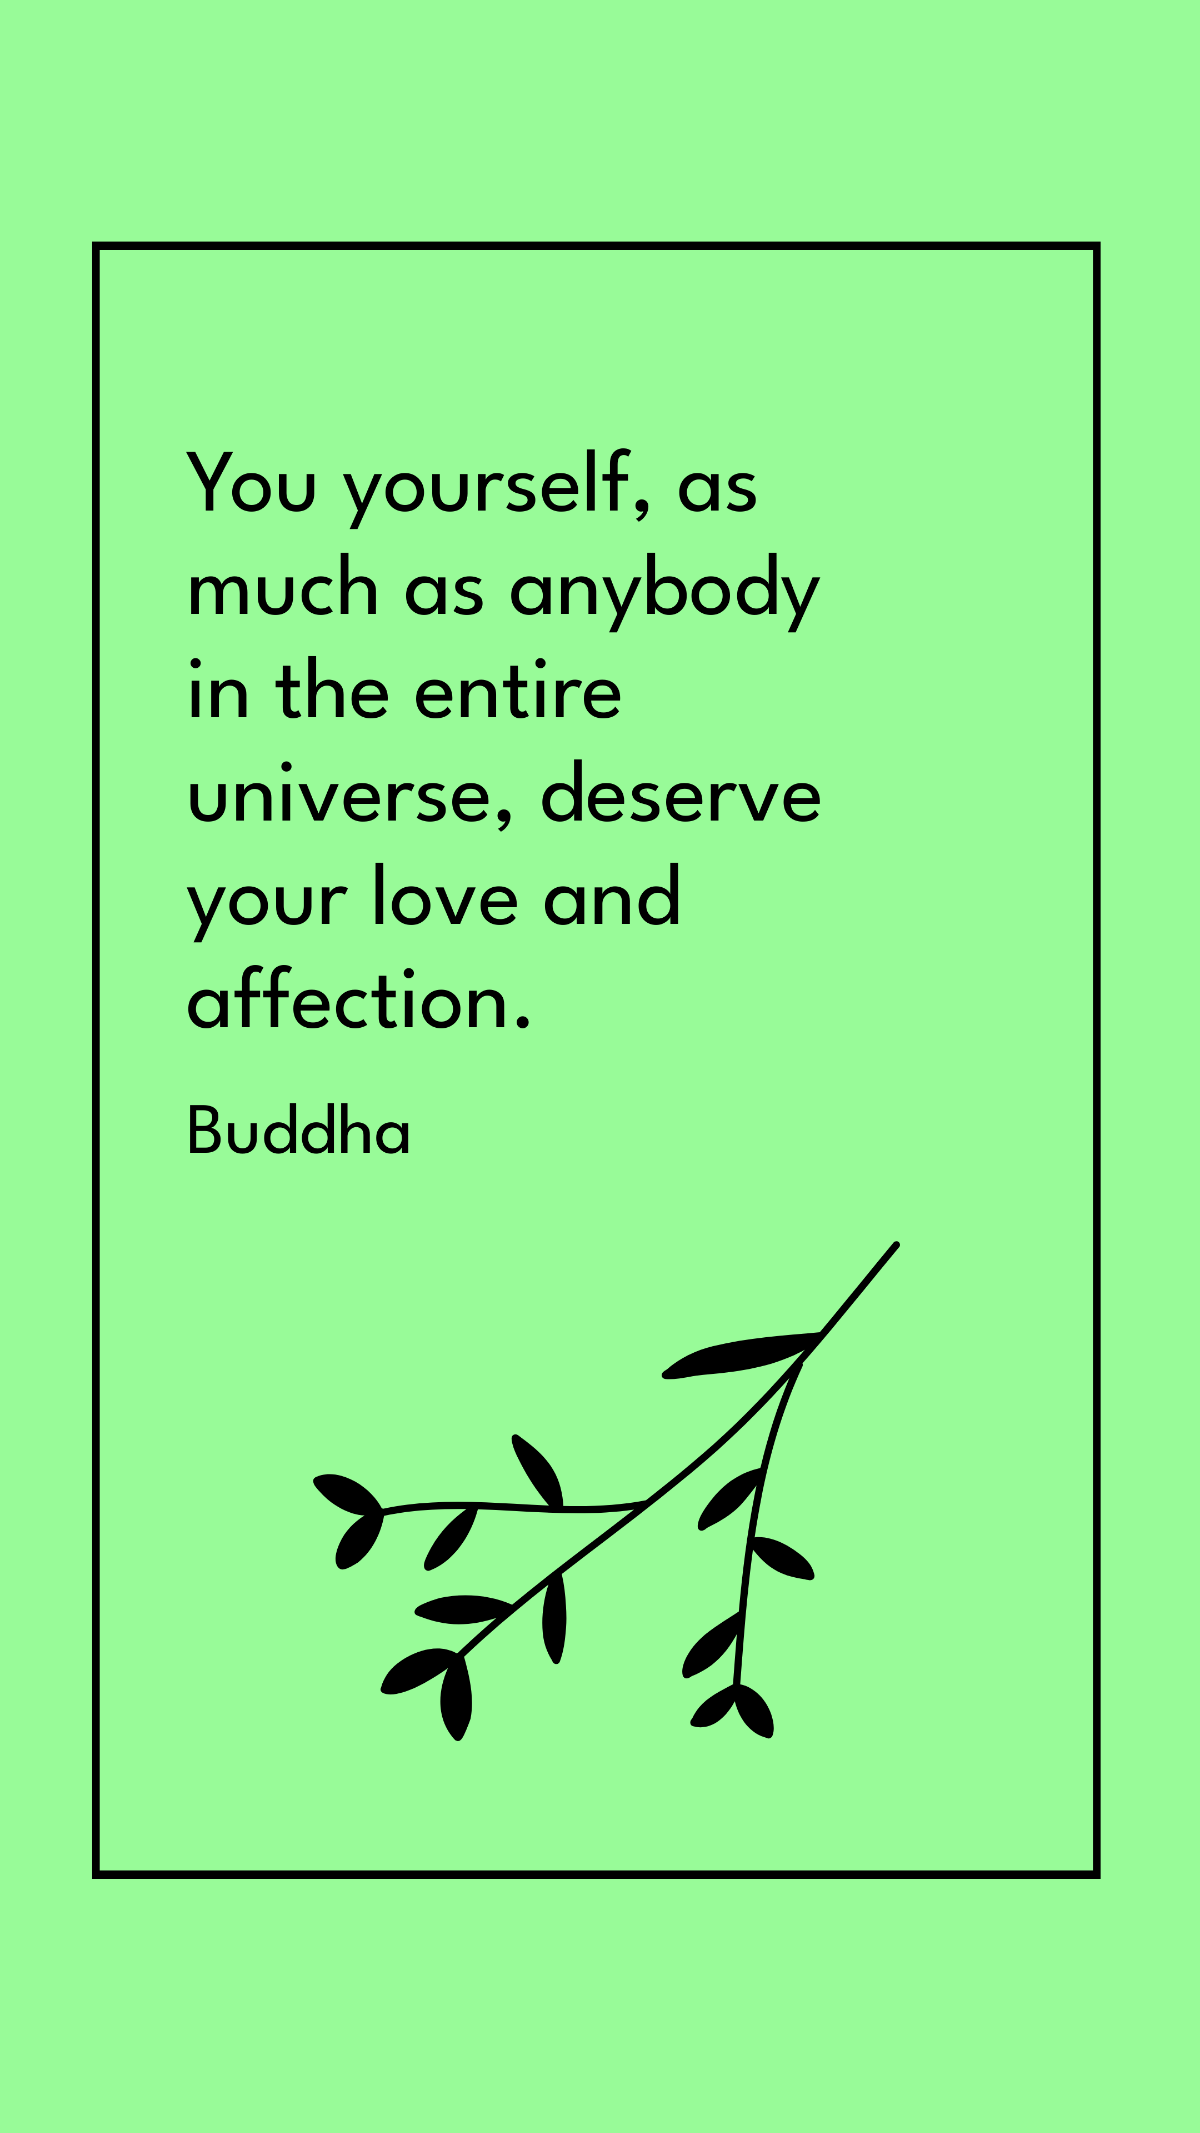 Buddha - You yourself, as much as anybody in the entire universe, deserve your love and affection.